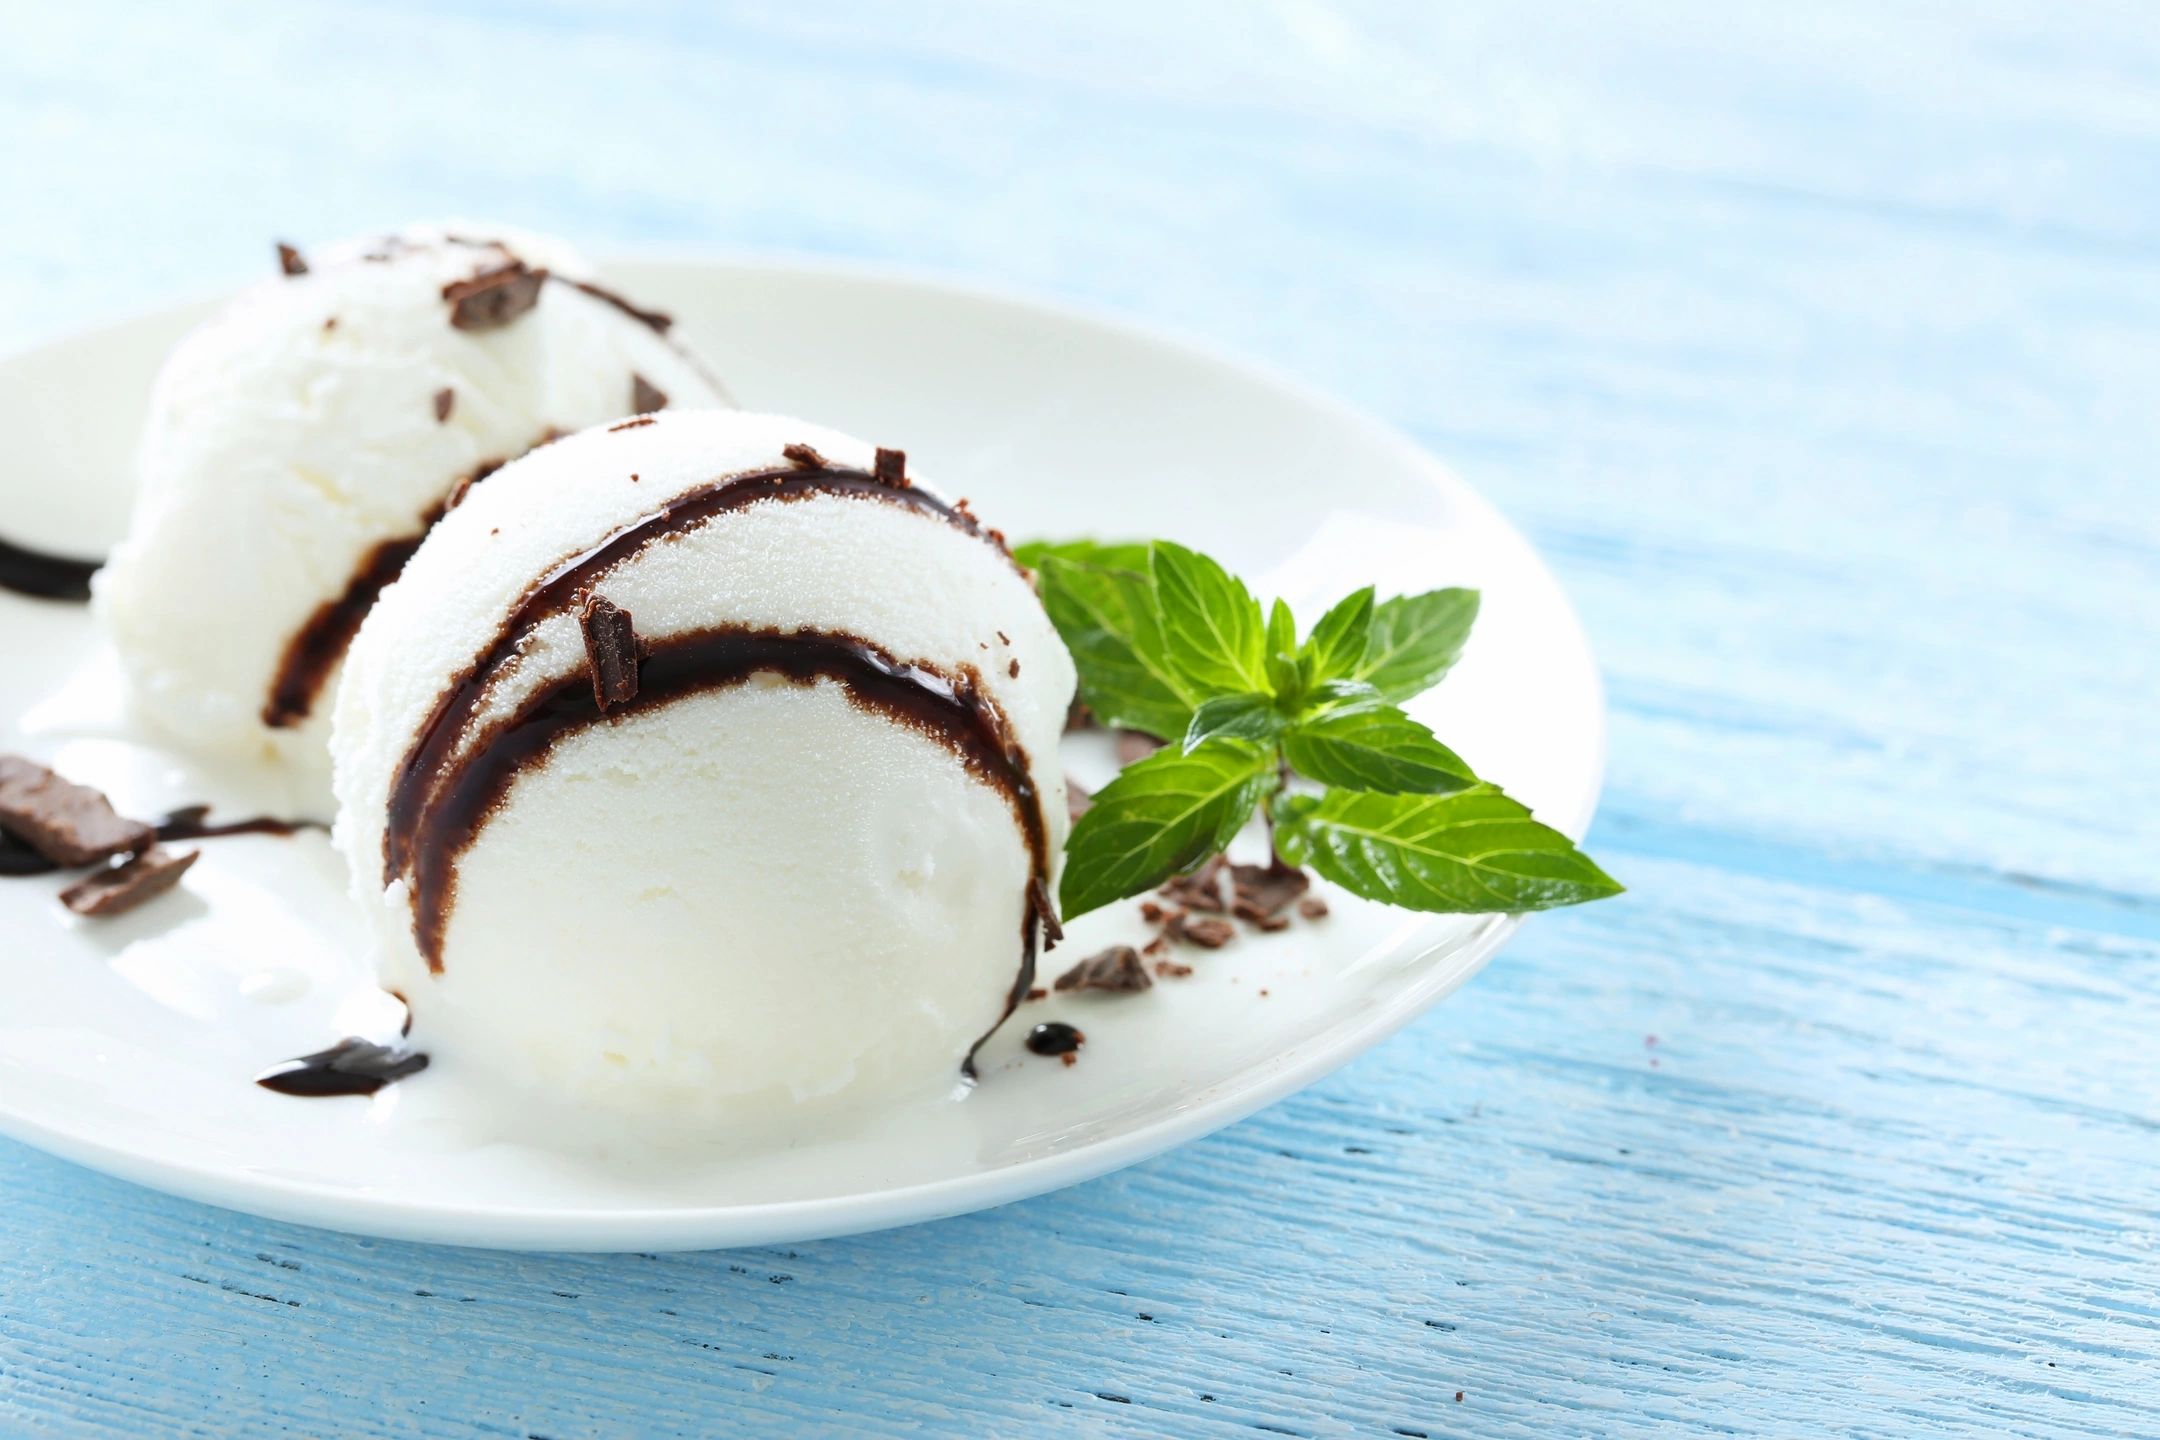 We supply local restaurants, pubs and hotels who serve our famous ice cream in their establishments.